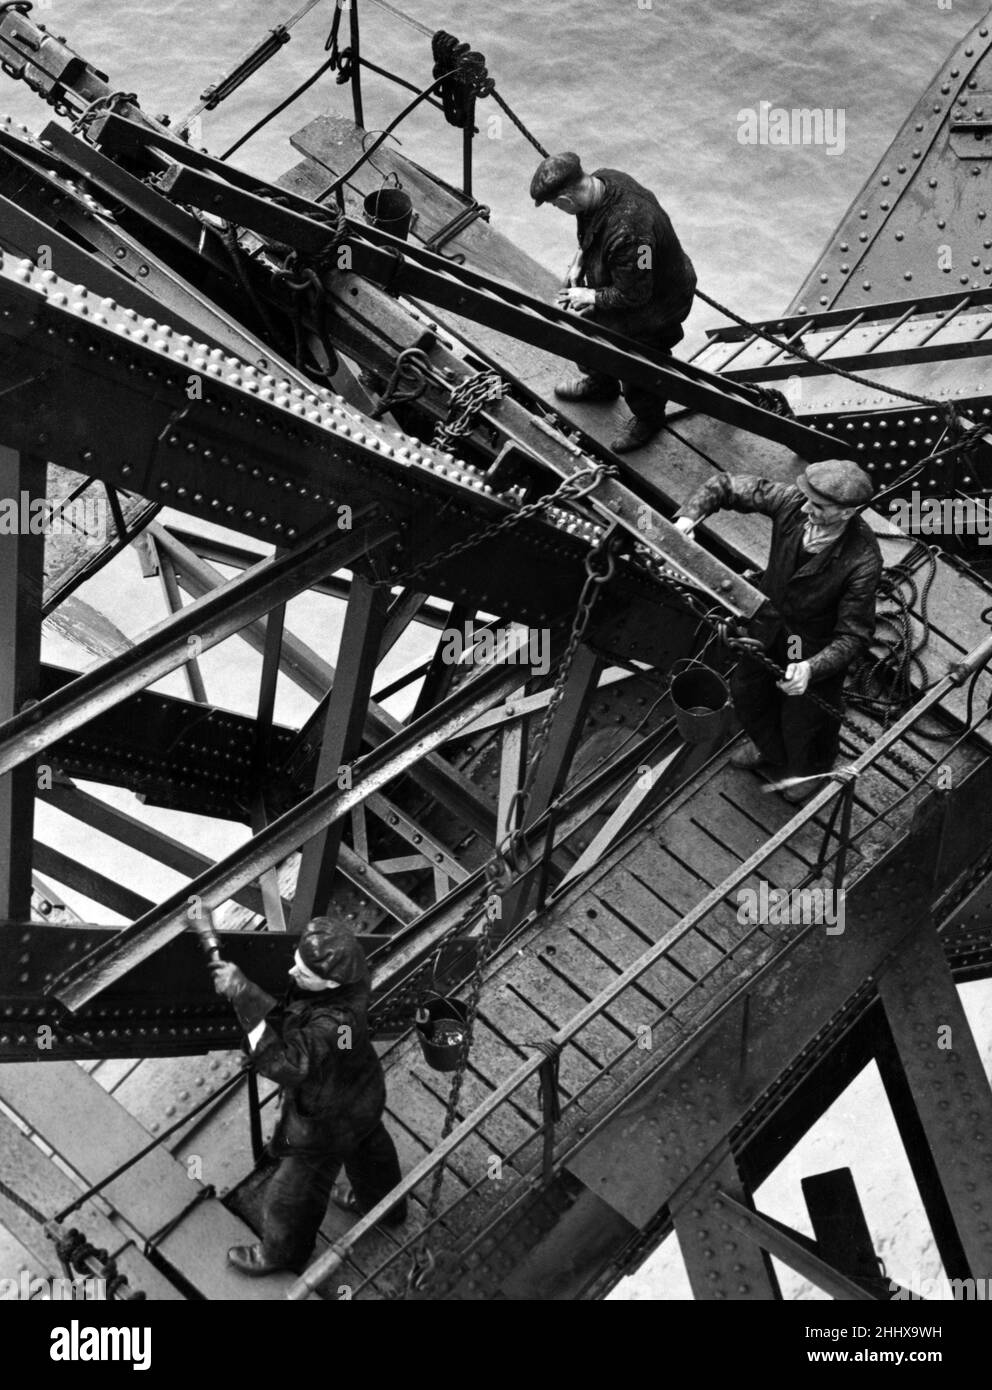 The men of the bridge. Painting the Forth Bridge is a long and complex task, taking three years to complete. It requires 50 tons of paint each year and a squad of 24 men working permanently.  Each painter must have a complete disregard for height and the agility of a cat. Working 300 feet above the Forth calls for no ordinary tradesmen. The lower girders of the structure, lashed continually by salt spray, are painted with a black mixture, mainly composed of pitch. This was the idea of Foreman Paton and it counteracts the quick corrosive actions of the salt.  12th September 1949. Stock Photo